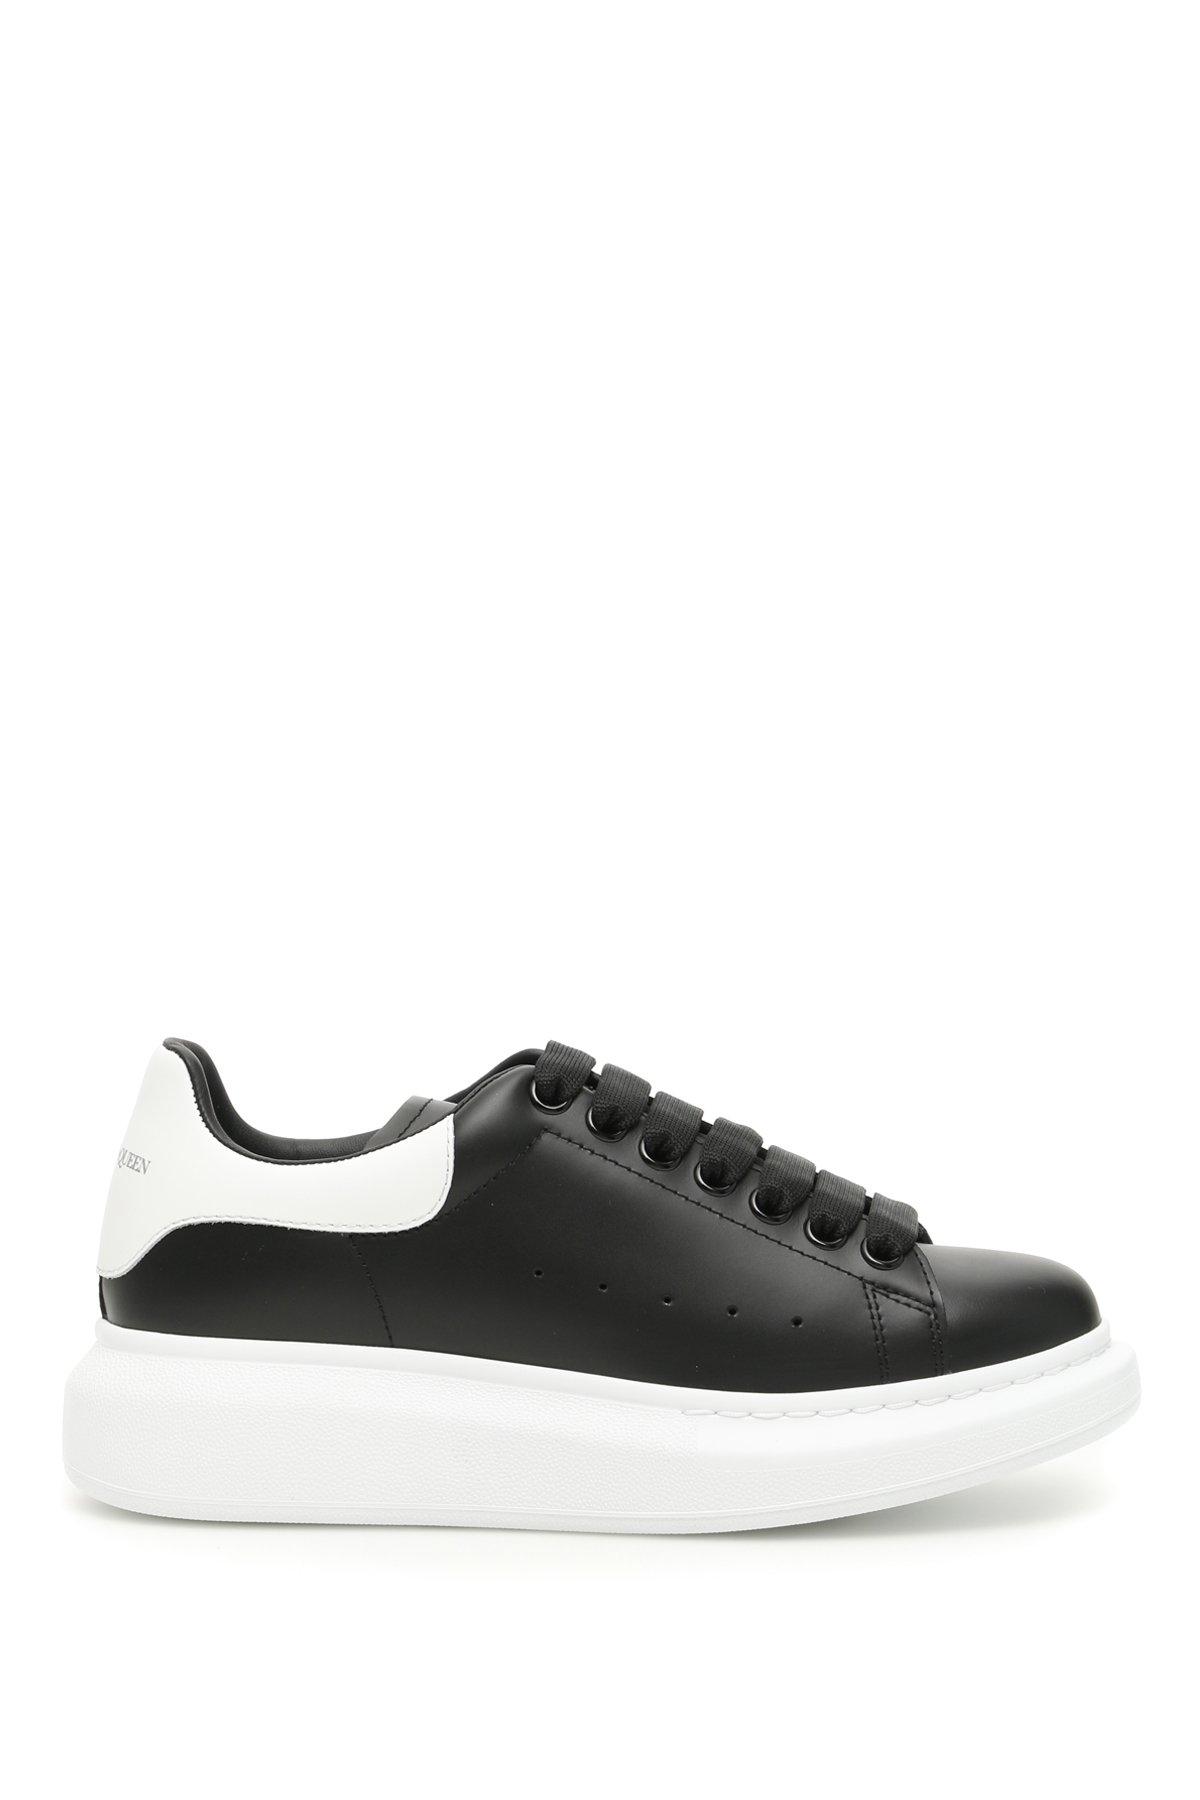 Alexander McQueen Oversize Sneakers In Leather in Black + White (Black) for  Men - Save 49% - Lyst